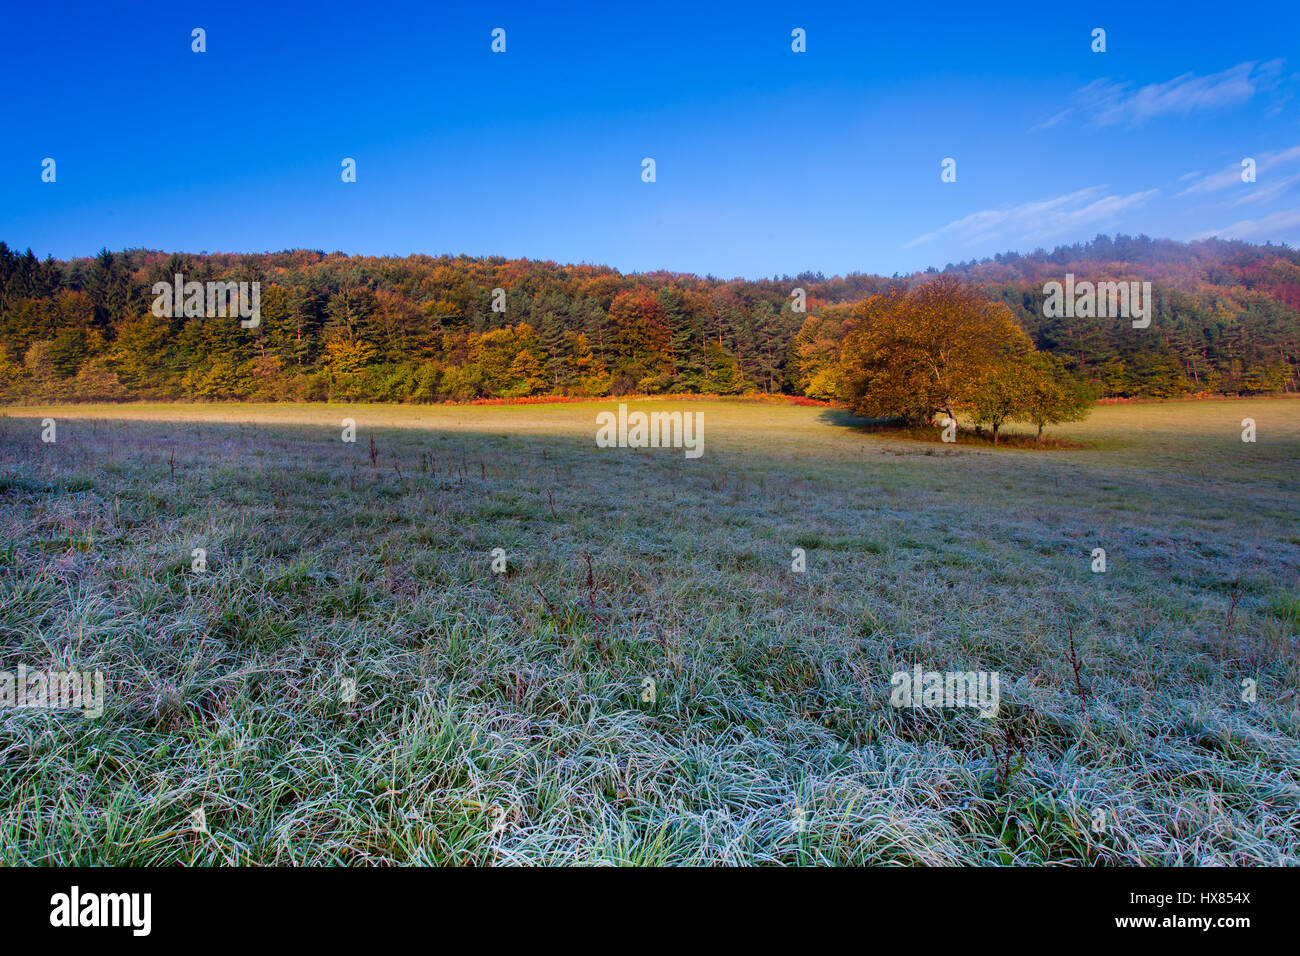 Frozen grass meadow with colorful trees Stock Photo